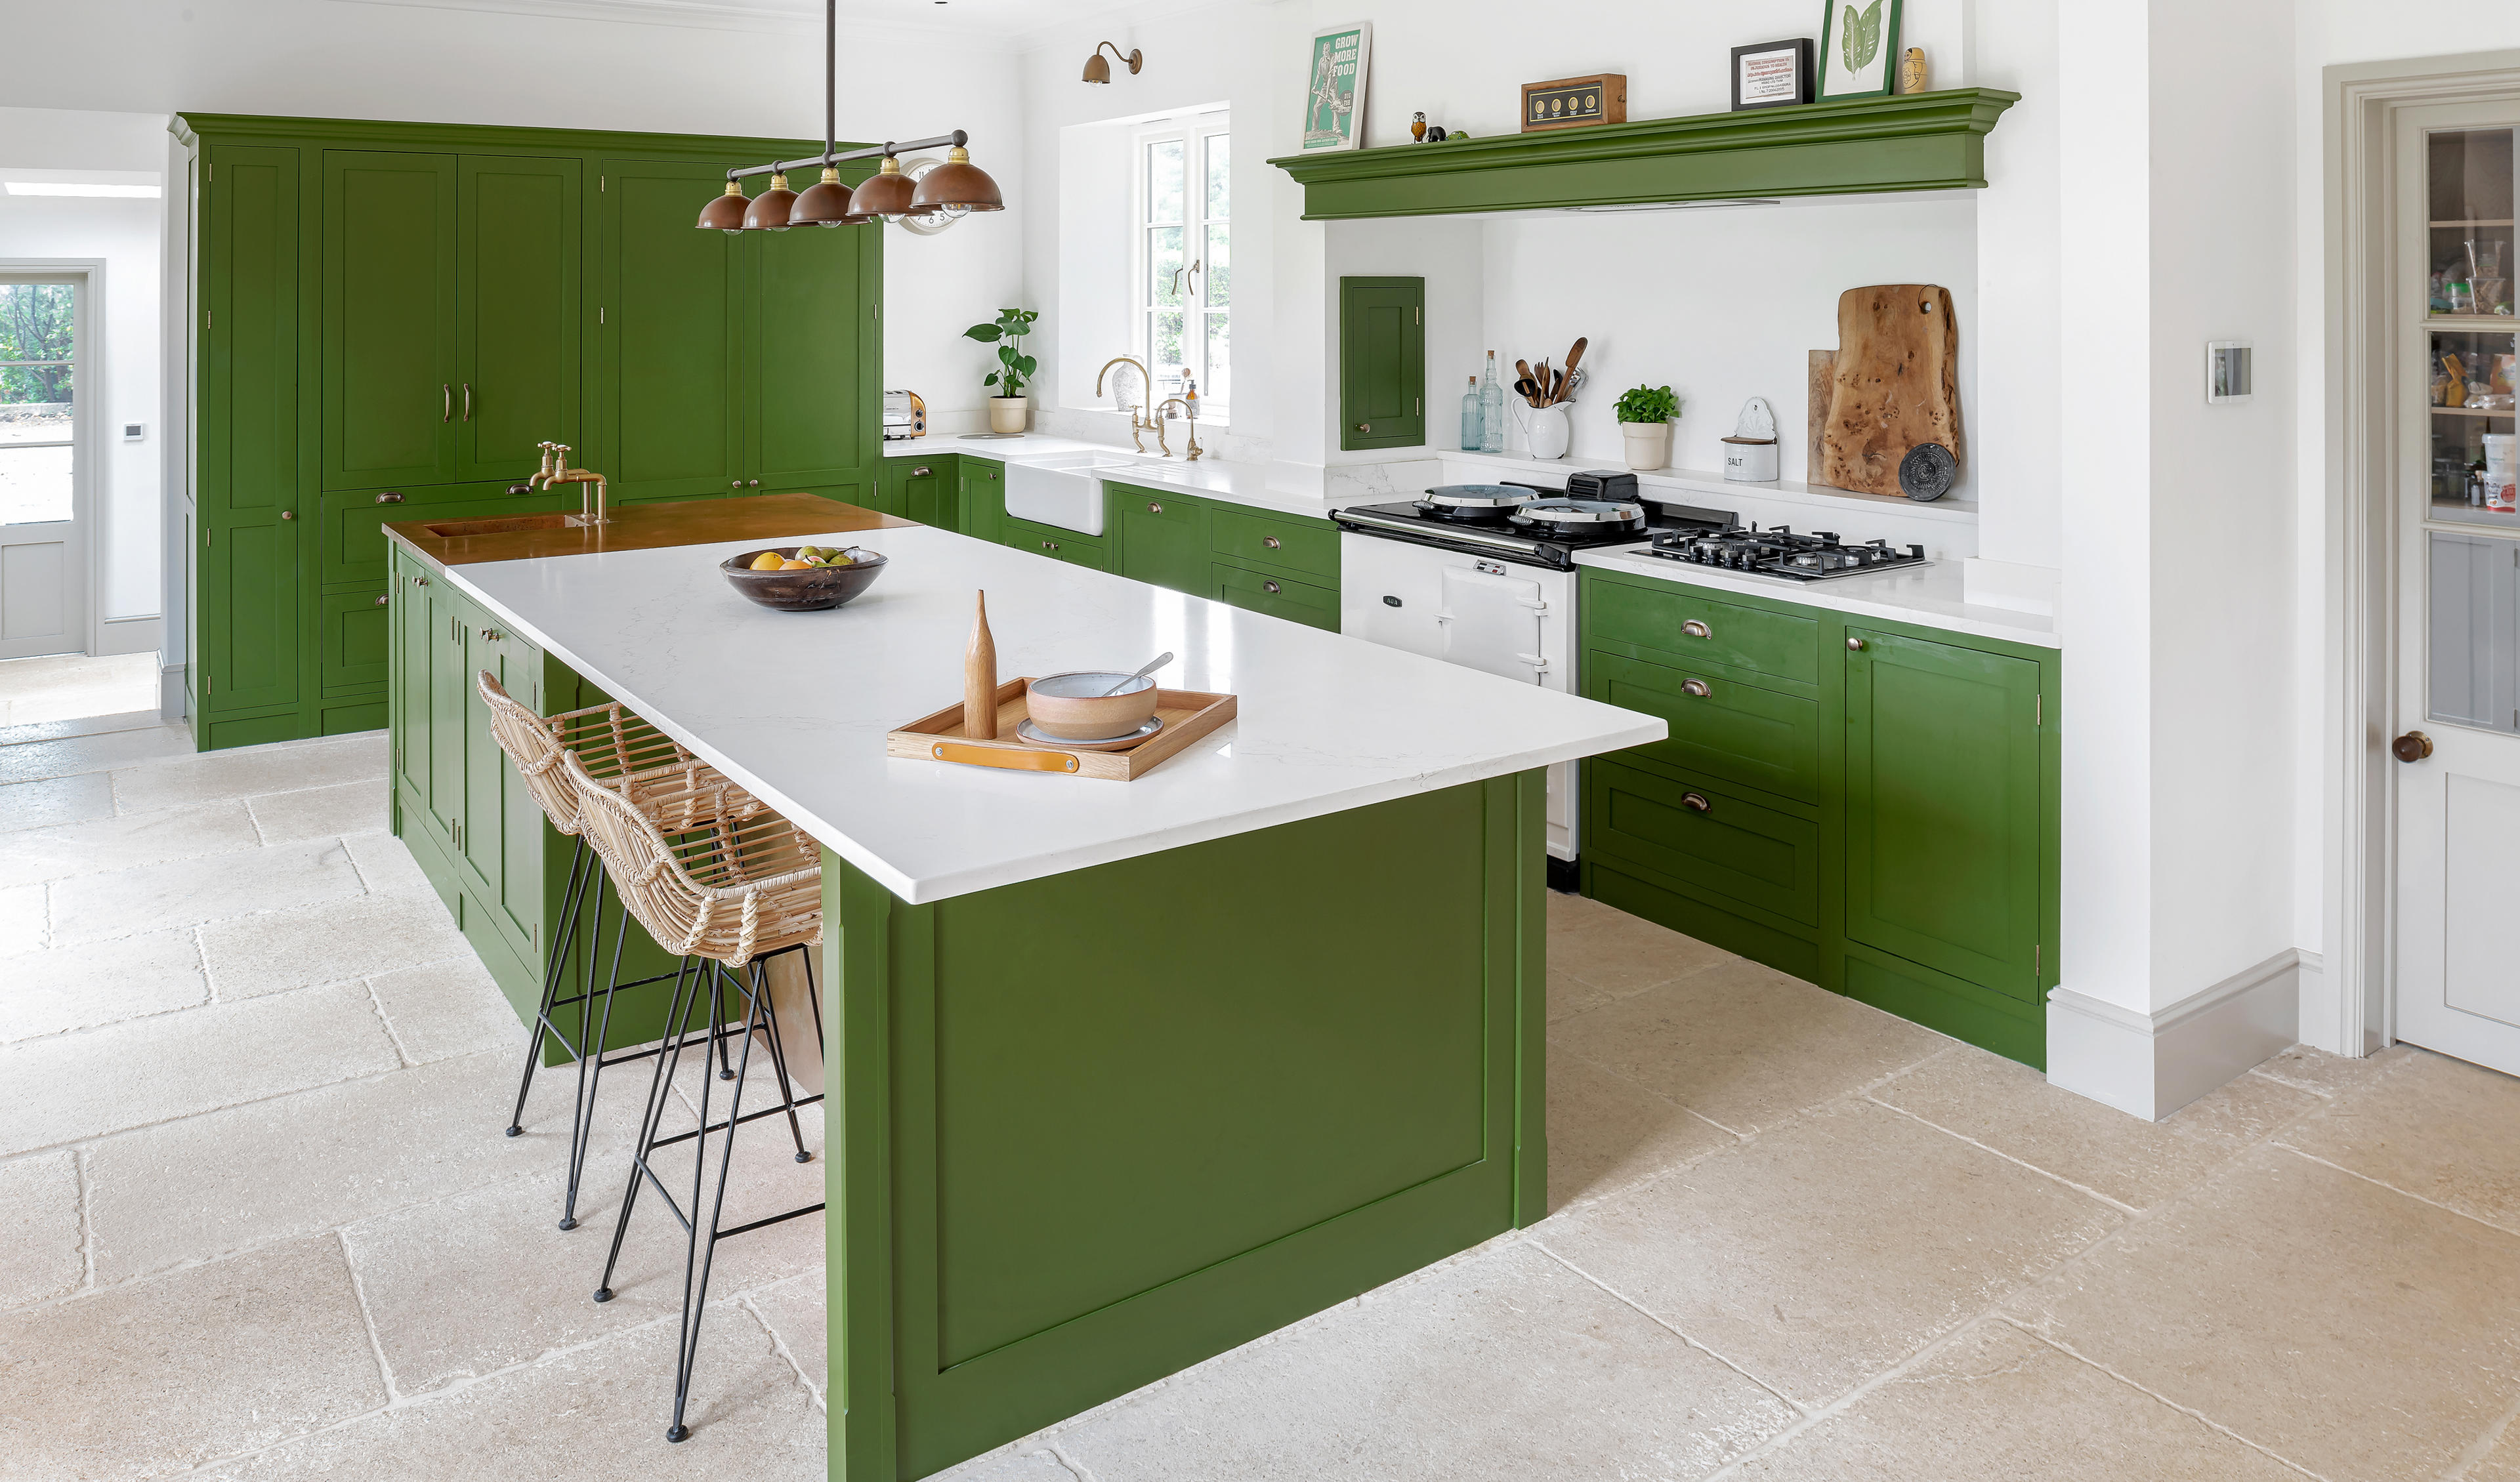 The clients were nervous about using such a bold colour for the cabinetry, but are now delighted about how bright and uplifting the finished kitchen feels.